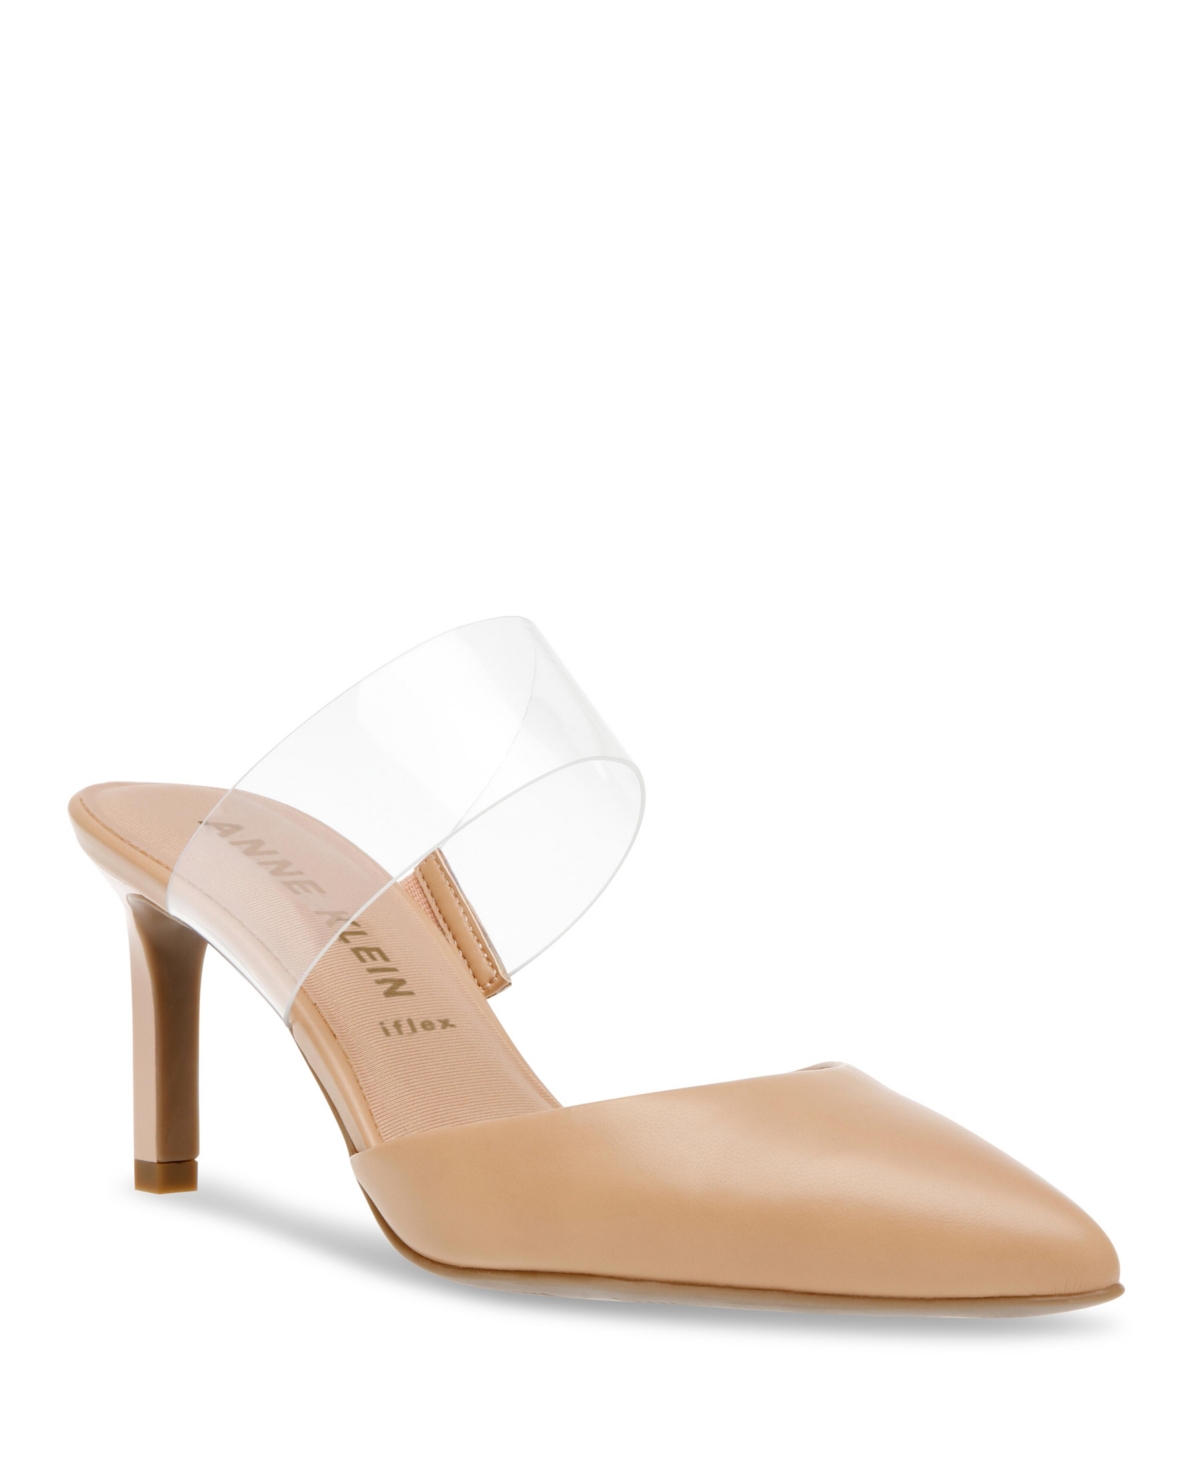 Women's Roz Dress Pumps - Nude Smooth